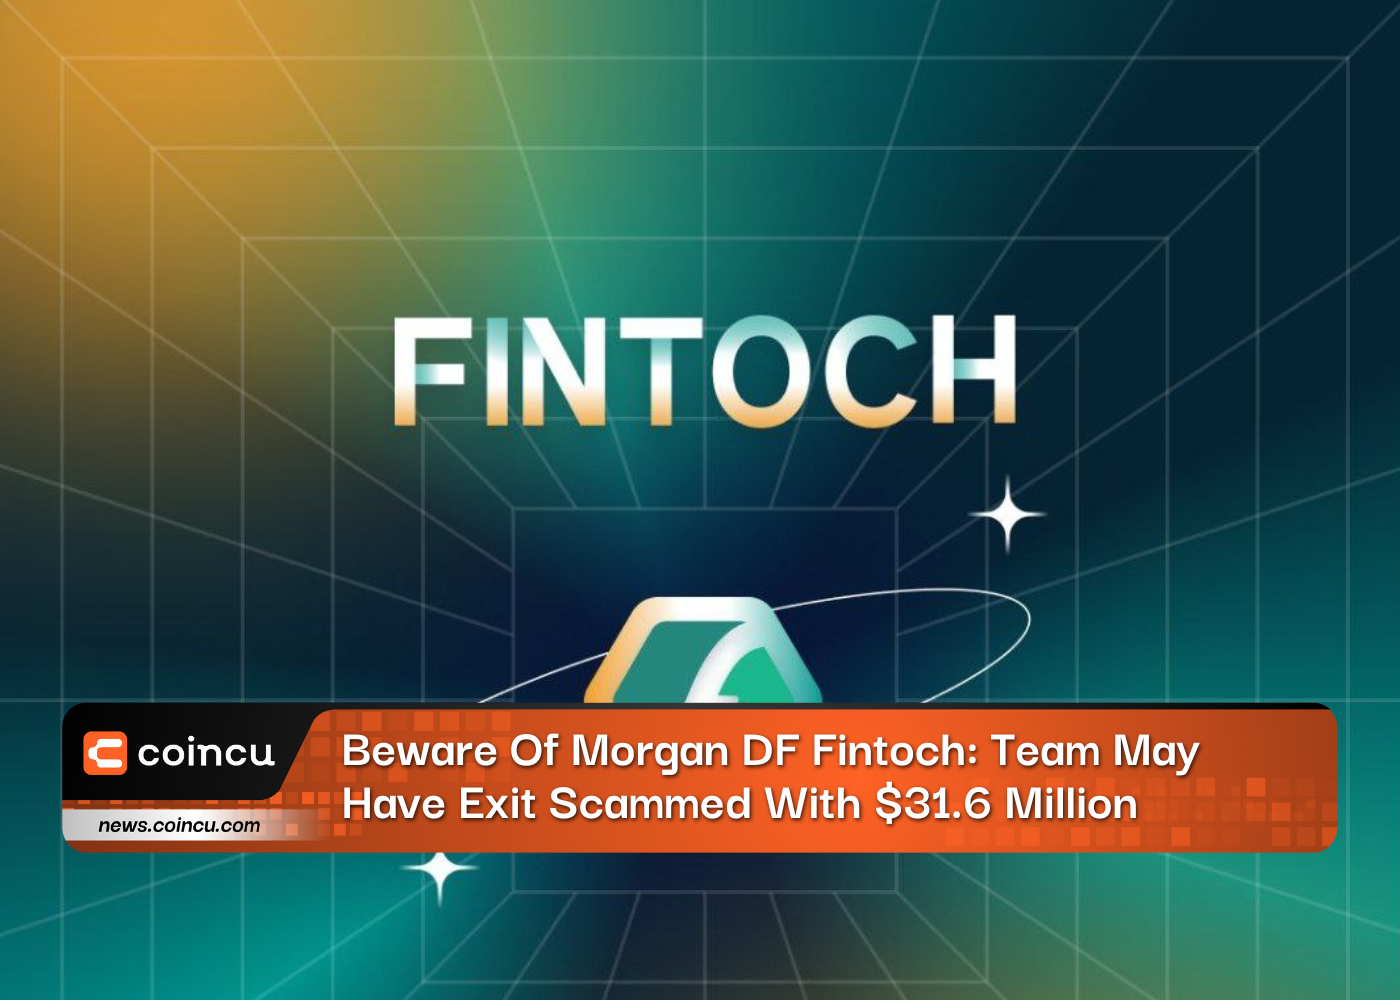 Beware Of Morgan DF Fintoch: Team May Have Exit Scammed With $31.6 Million